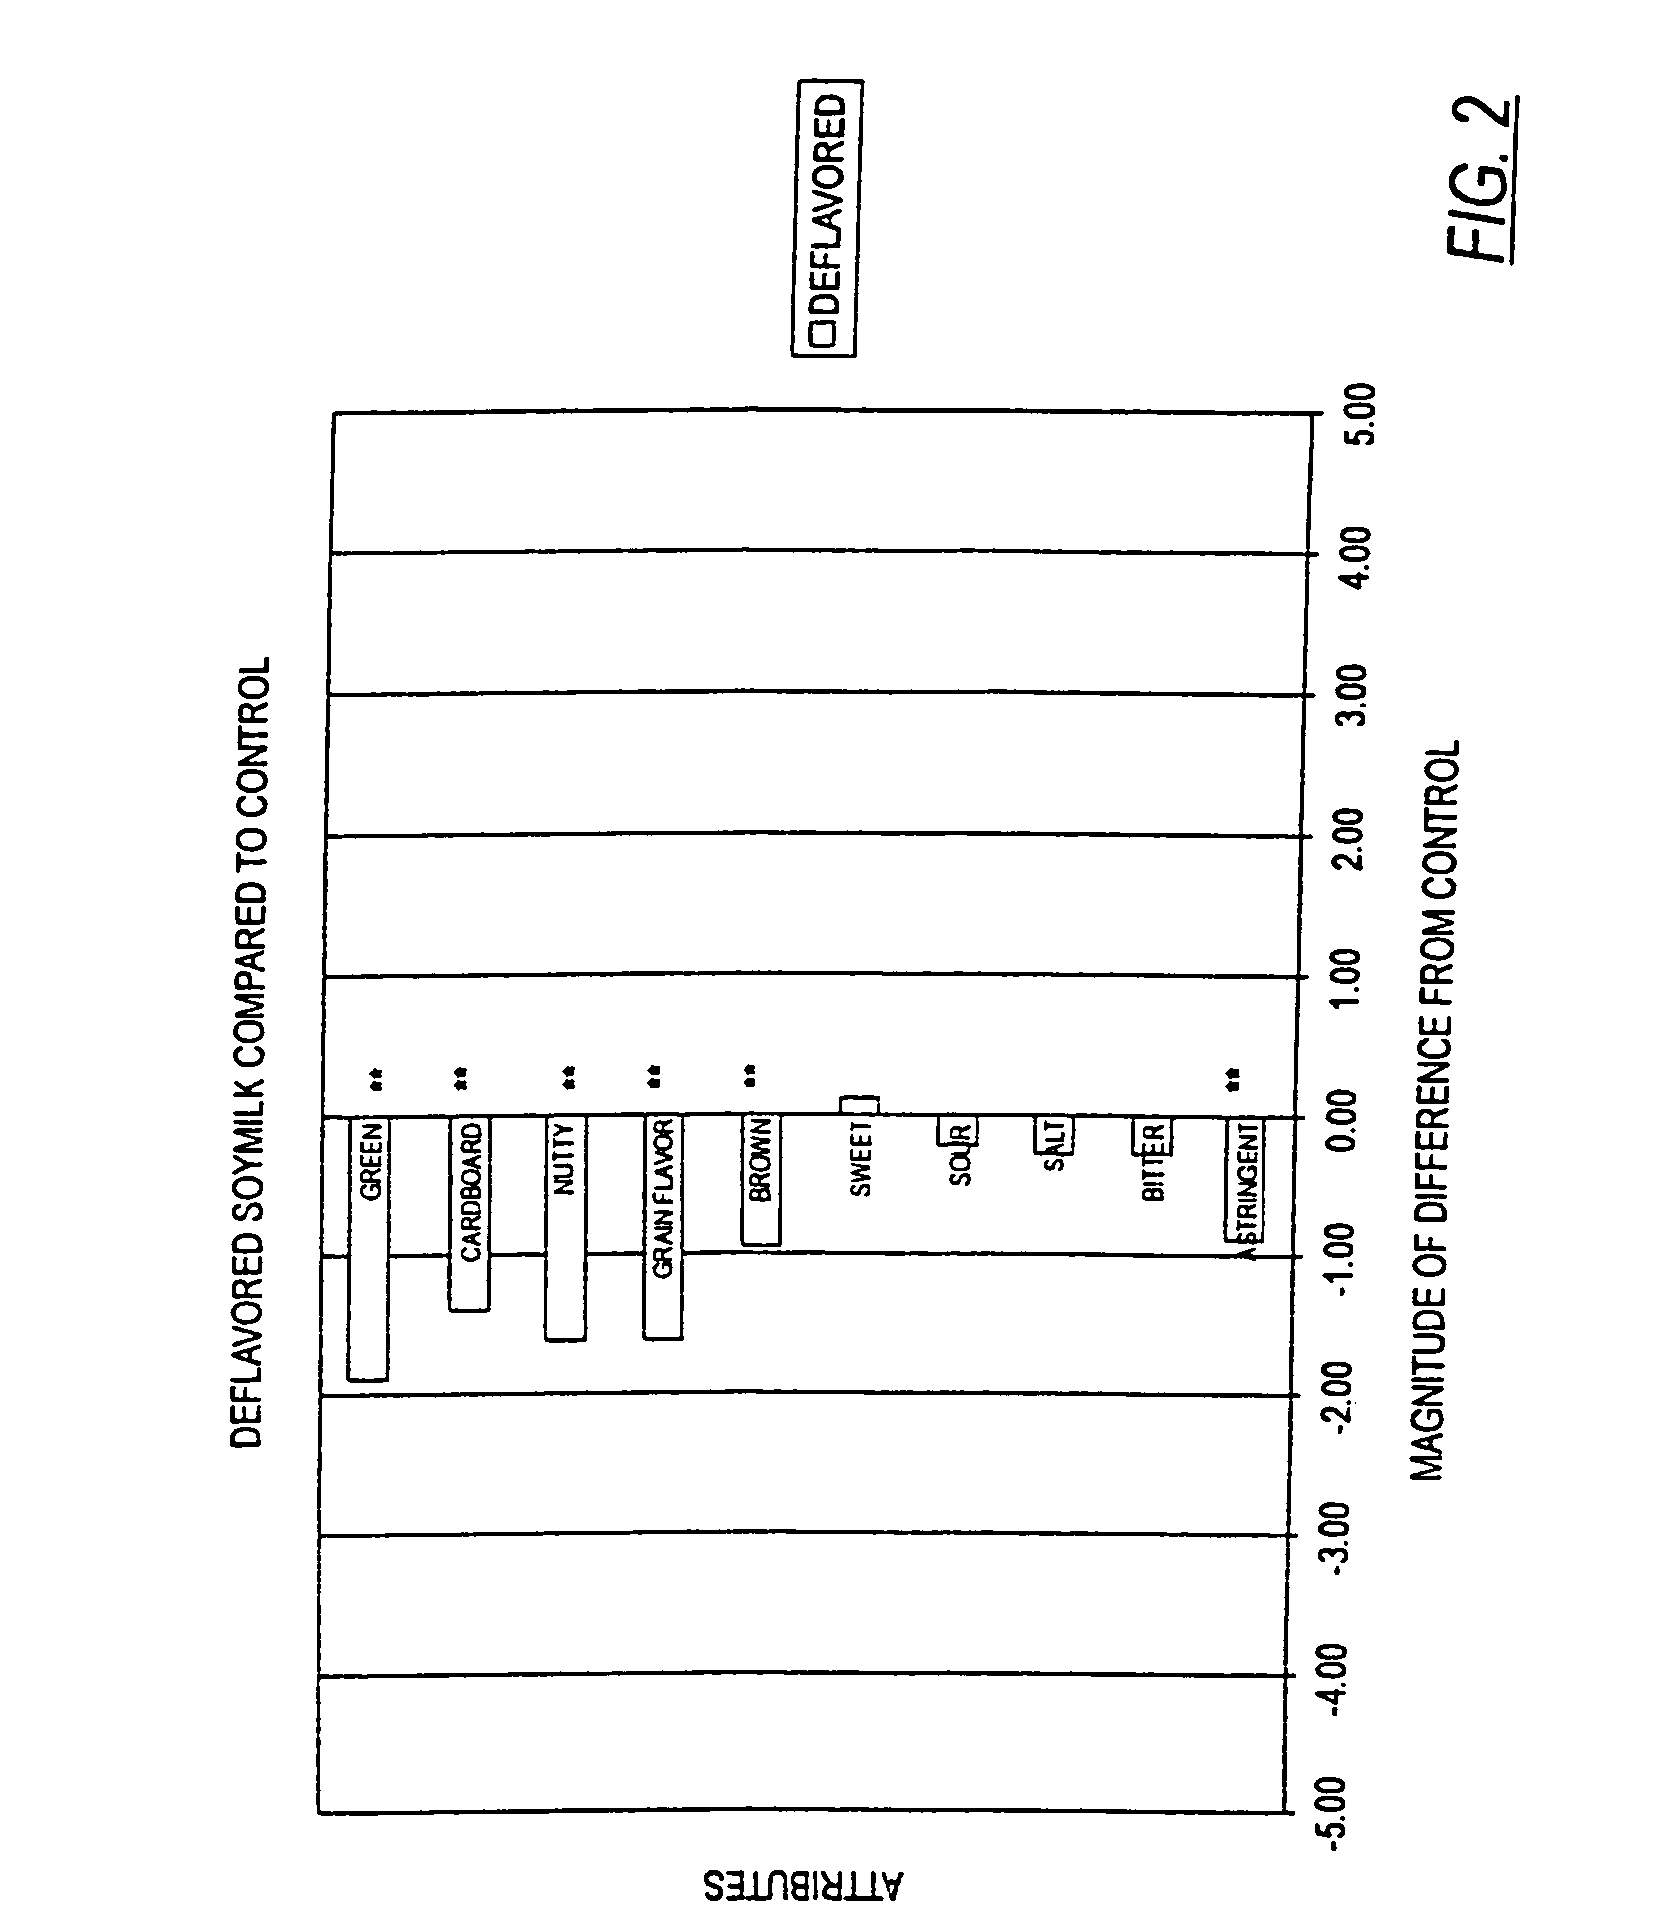 Method of preparation of high quality soy cultured products